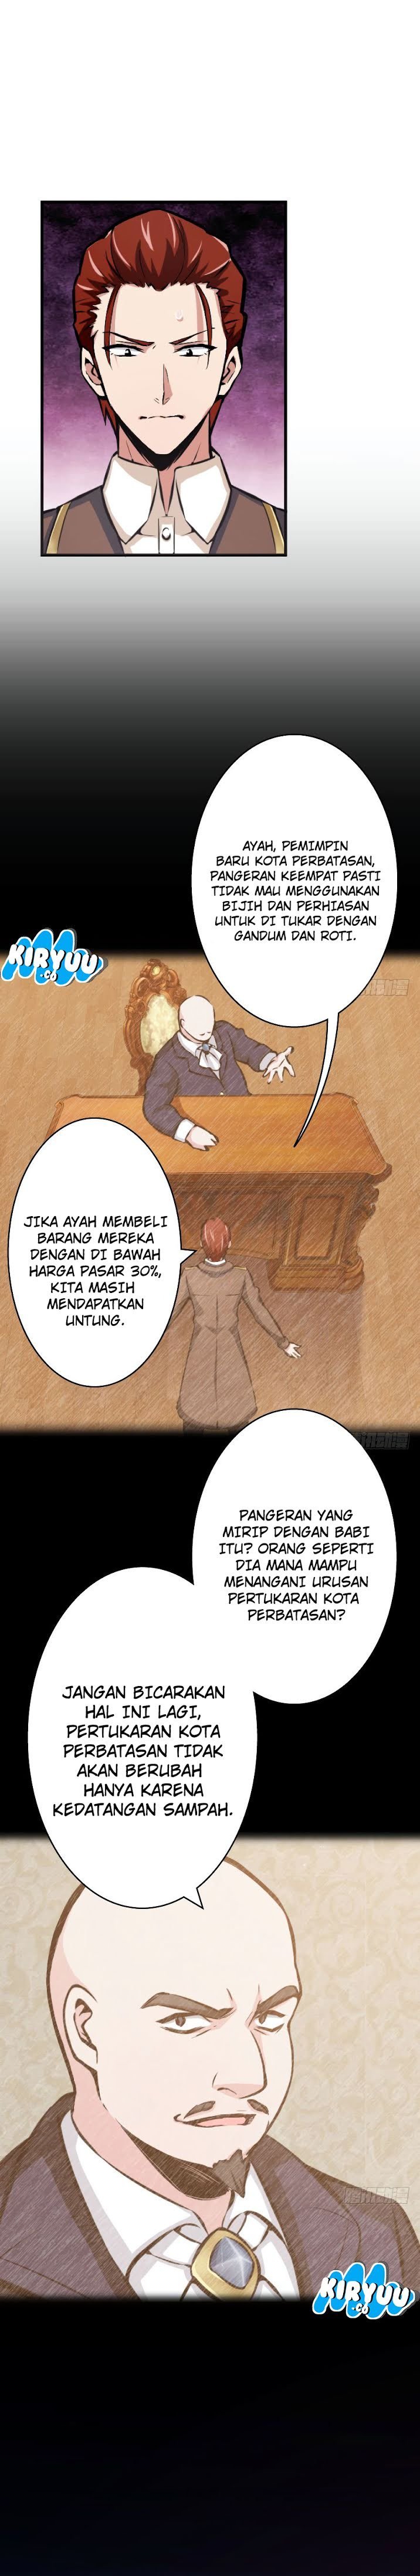 Release That Witch Chapter 15 bahasa indonesia